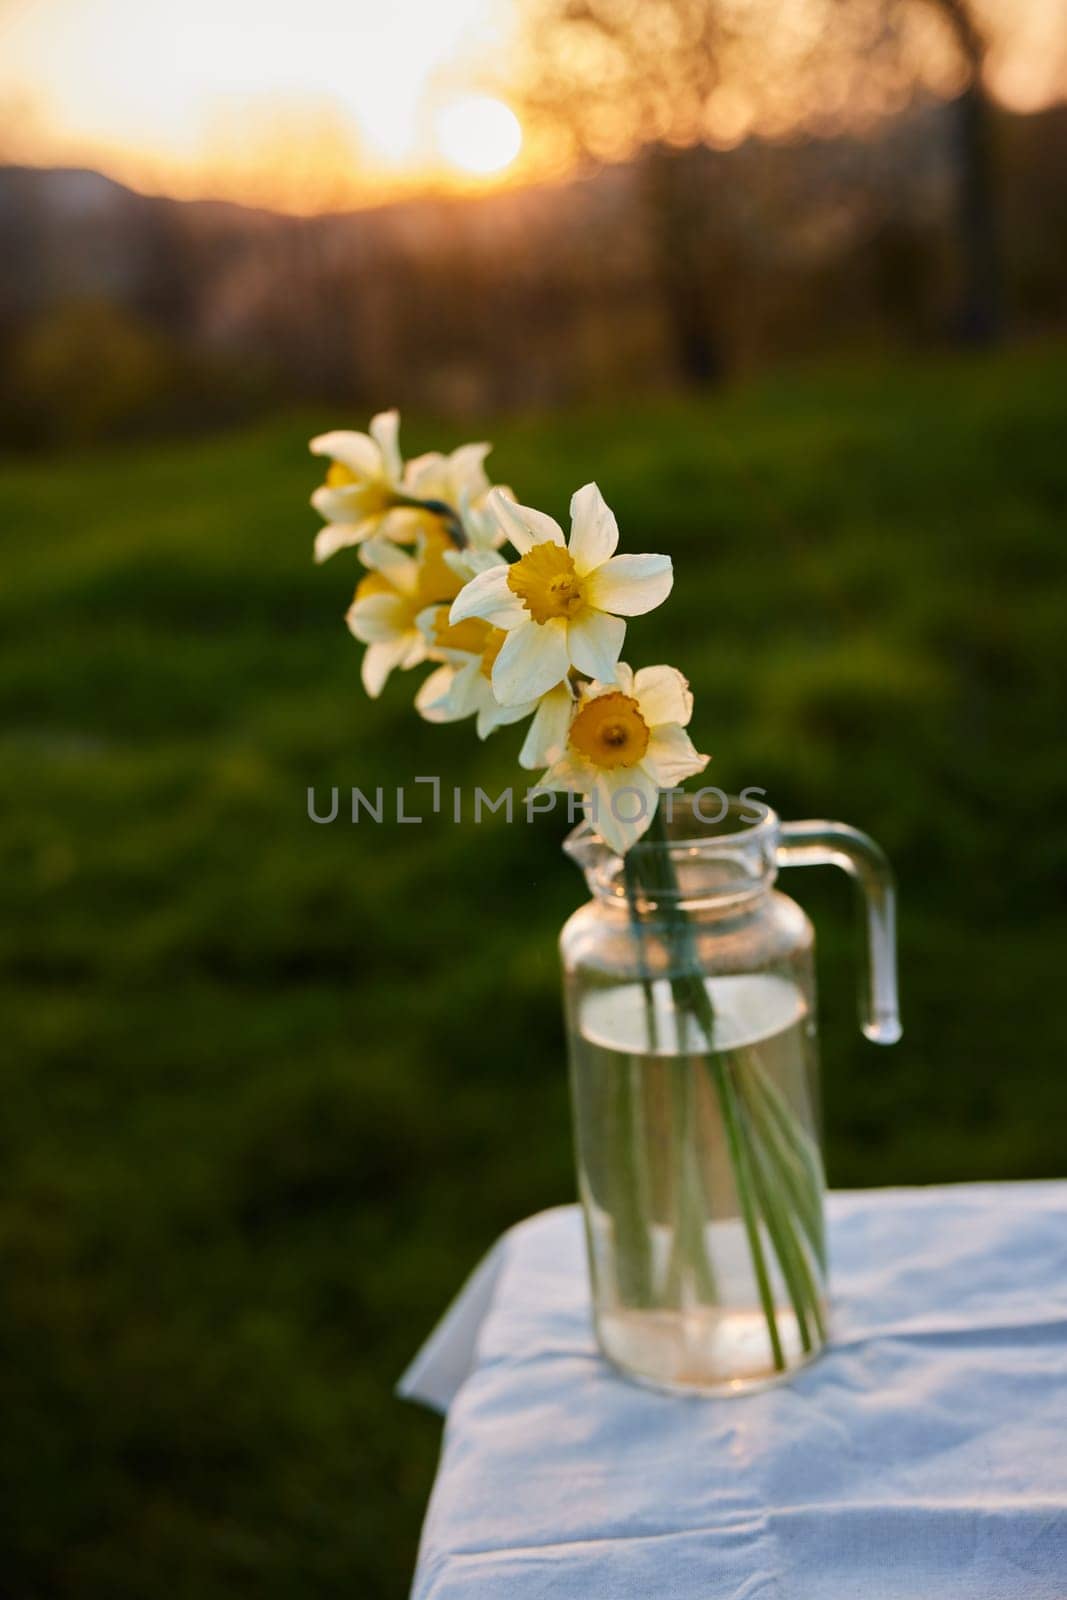 aesthetic photograph of daffodil bouquets standing on a street table by Vichizh